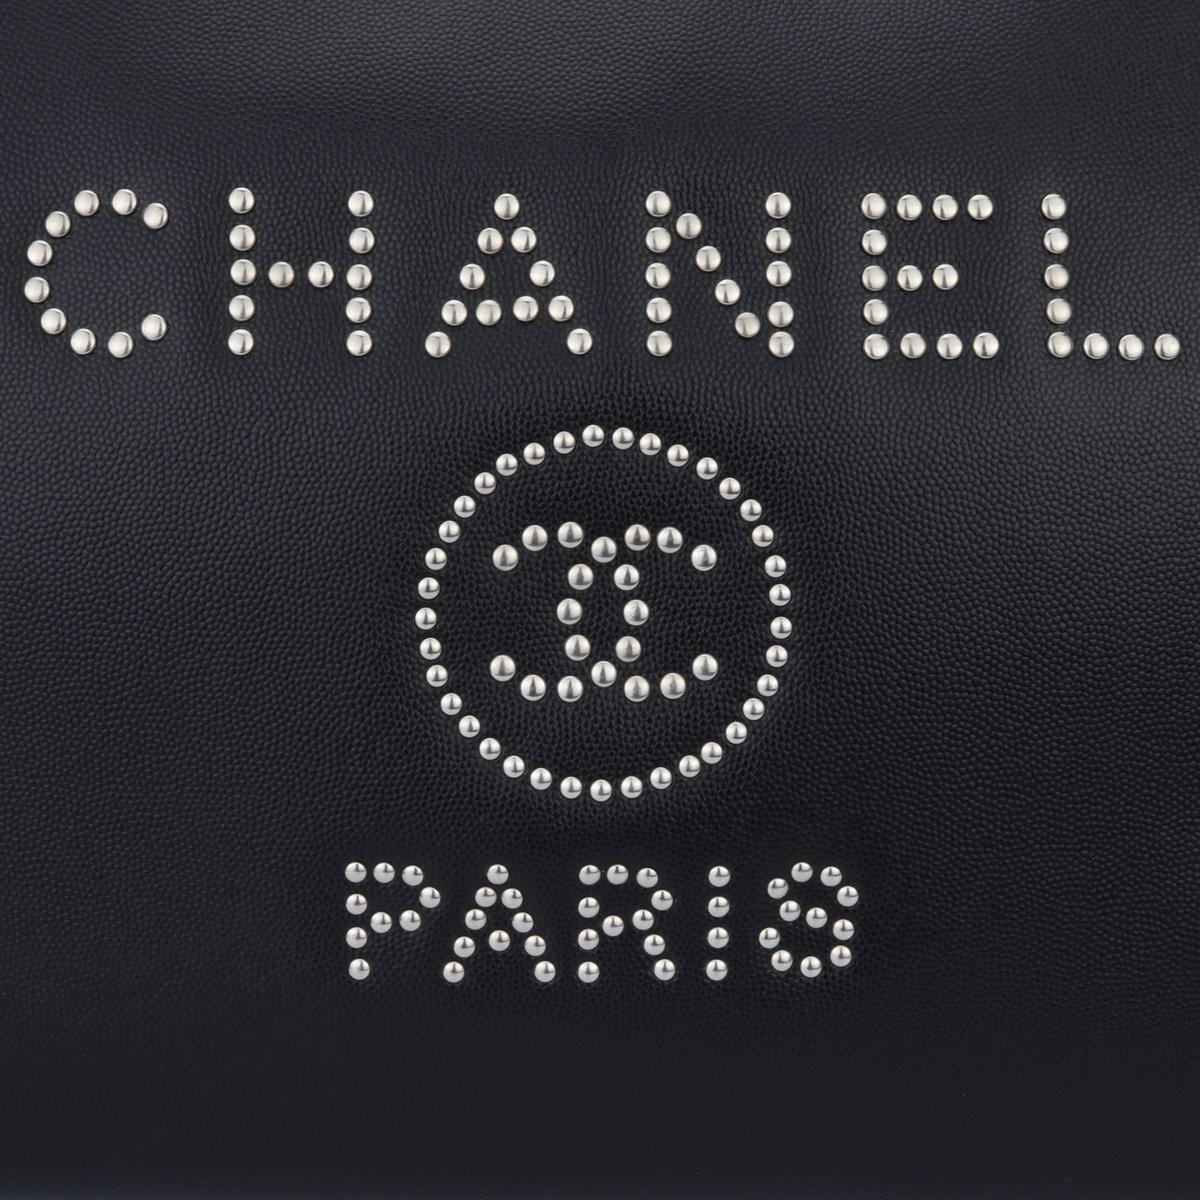 Authentic CHANEL Deauville Tote Large Black Caviar Studded with Silver Hardware 2018.

This bag is in excellent-mint condition. It still keeps the original shape and leather smells fresh as if new.

Exterior Condition: Mint condition, corners show